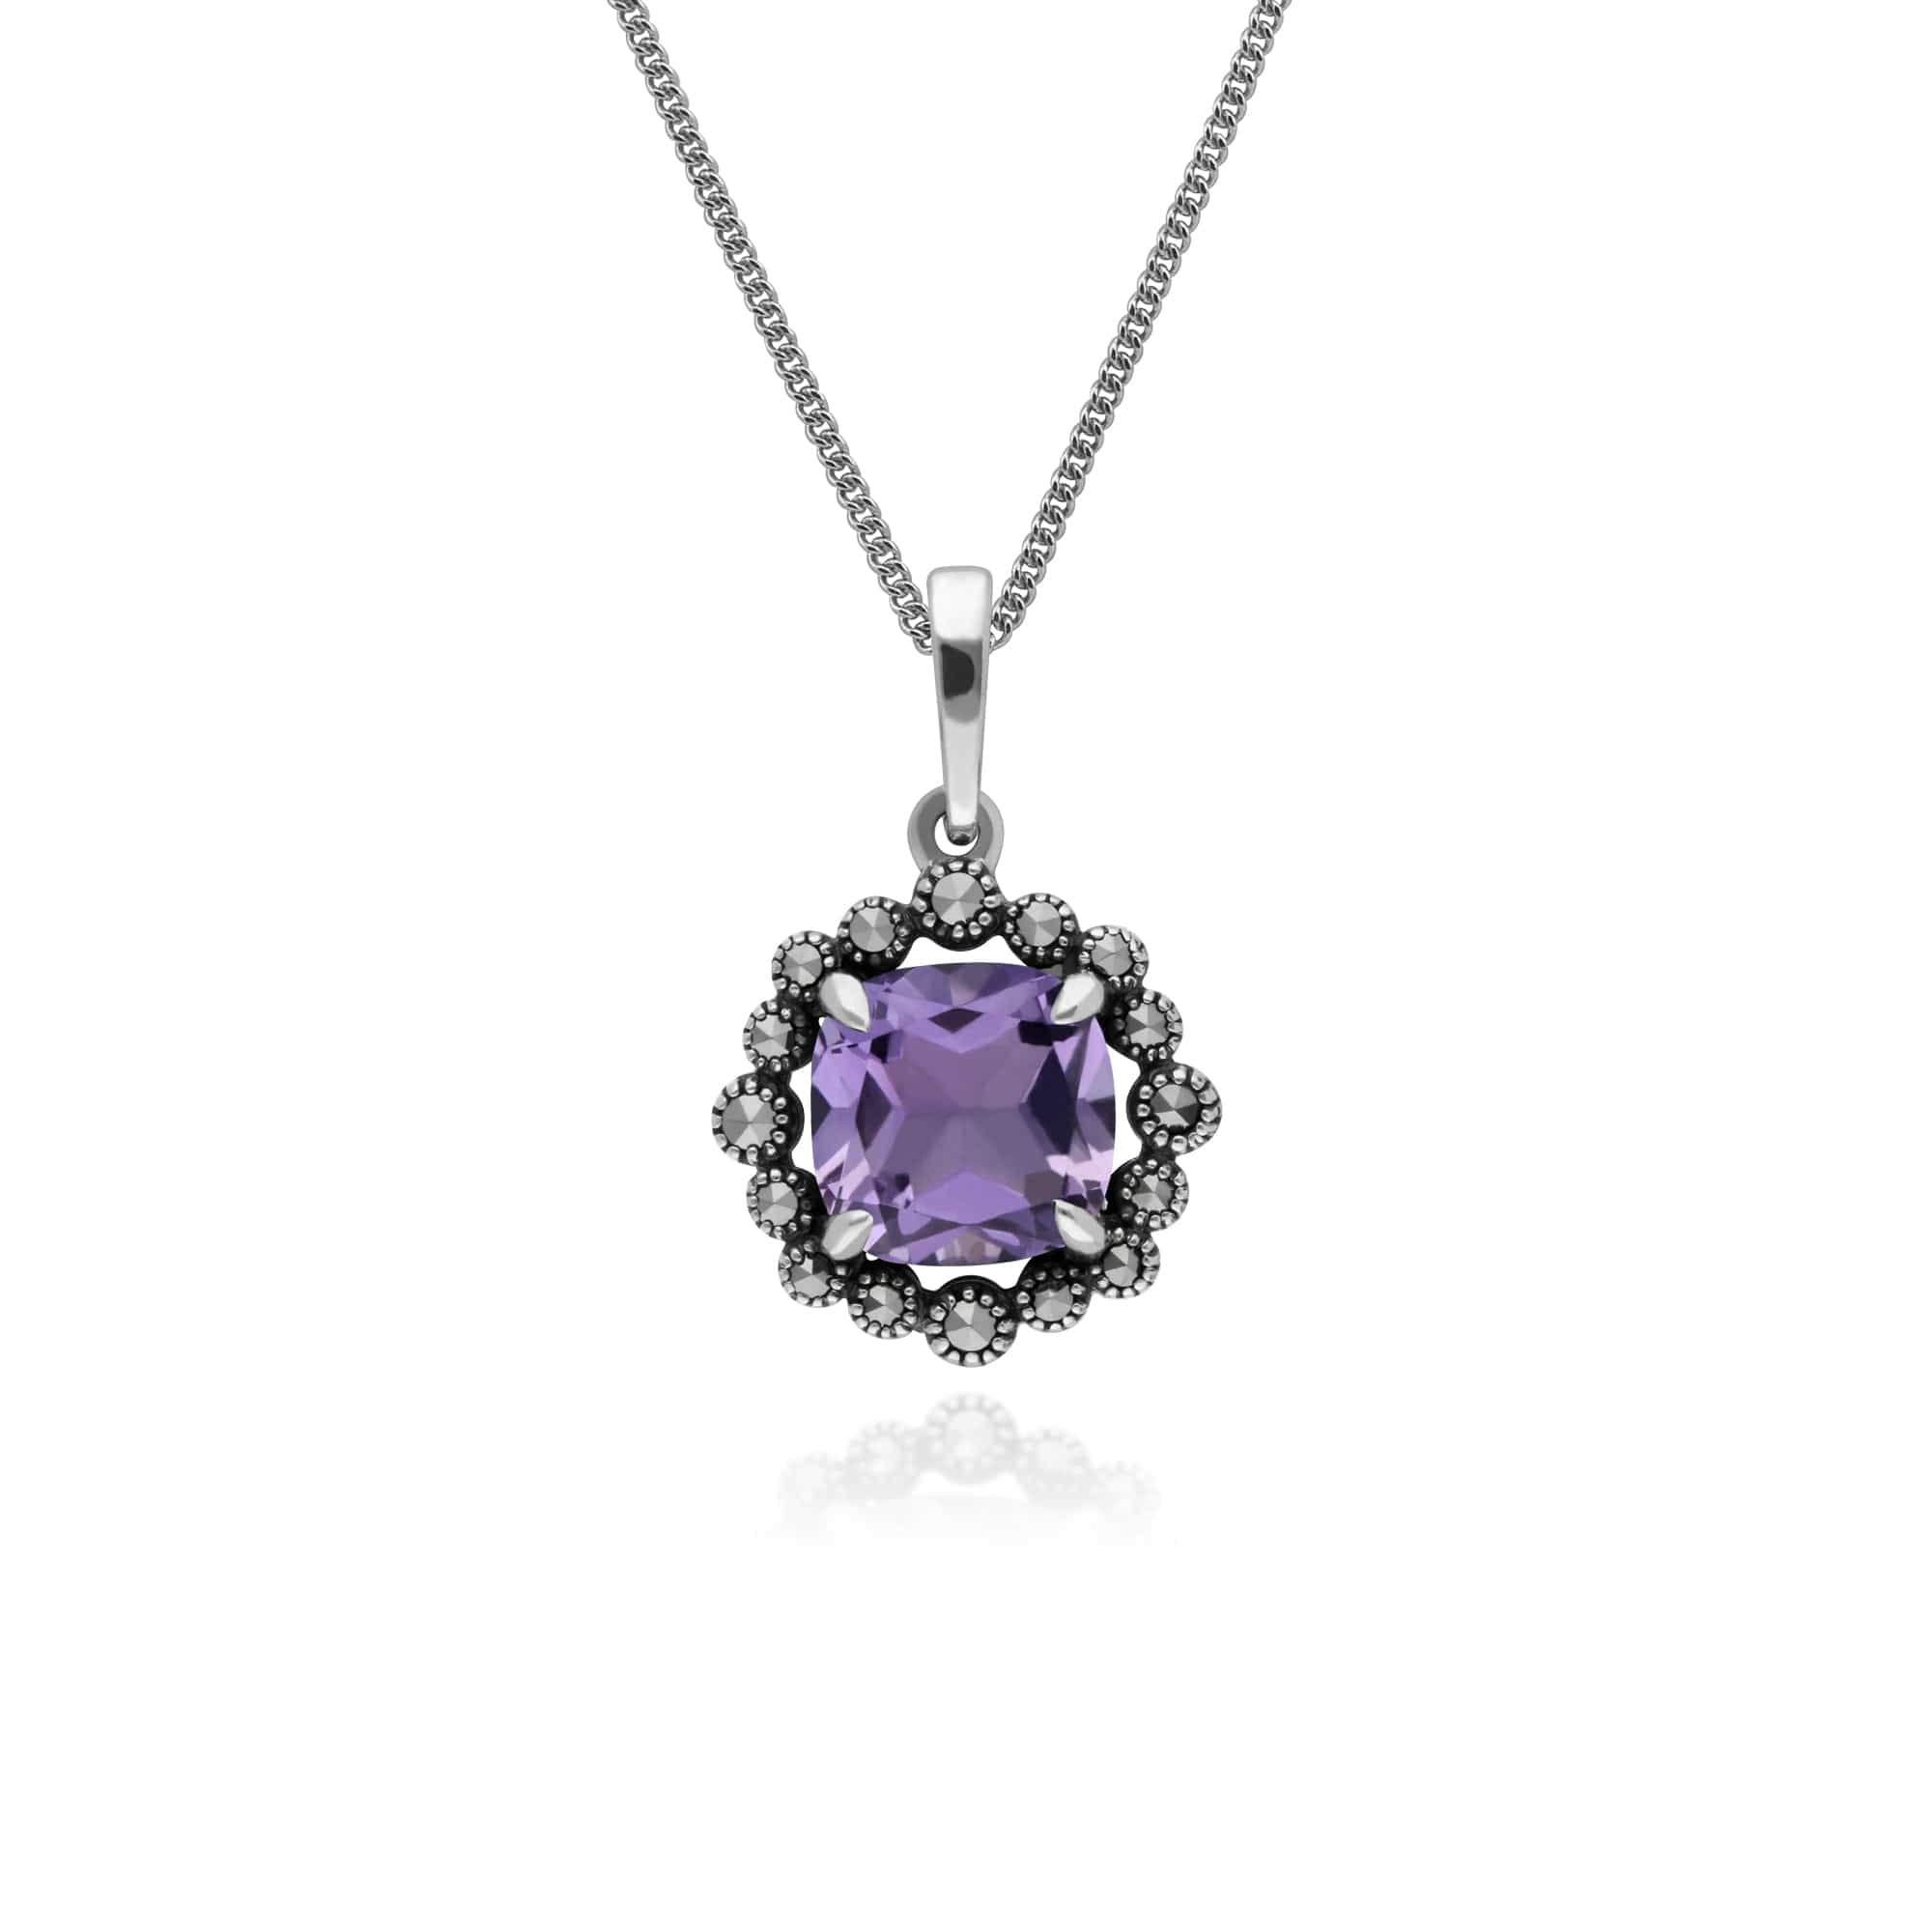 214E870902925-214P301501925 Art Deco Style Cushion Amethyst & Marcasite Cushion Drop Earrings & Necklace Set in 925 Sterling Silver 3